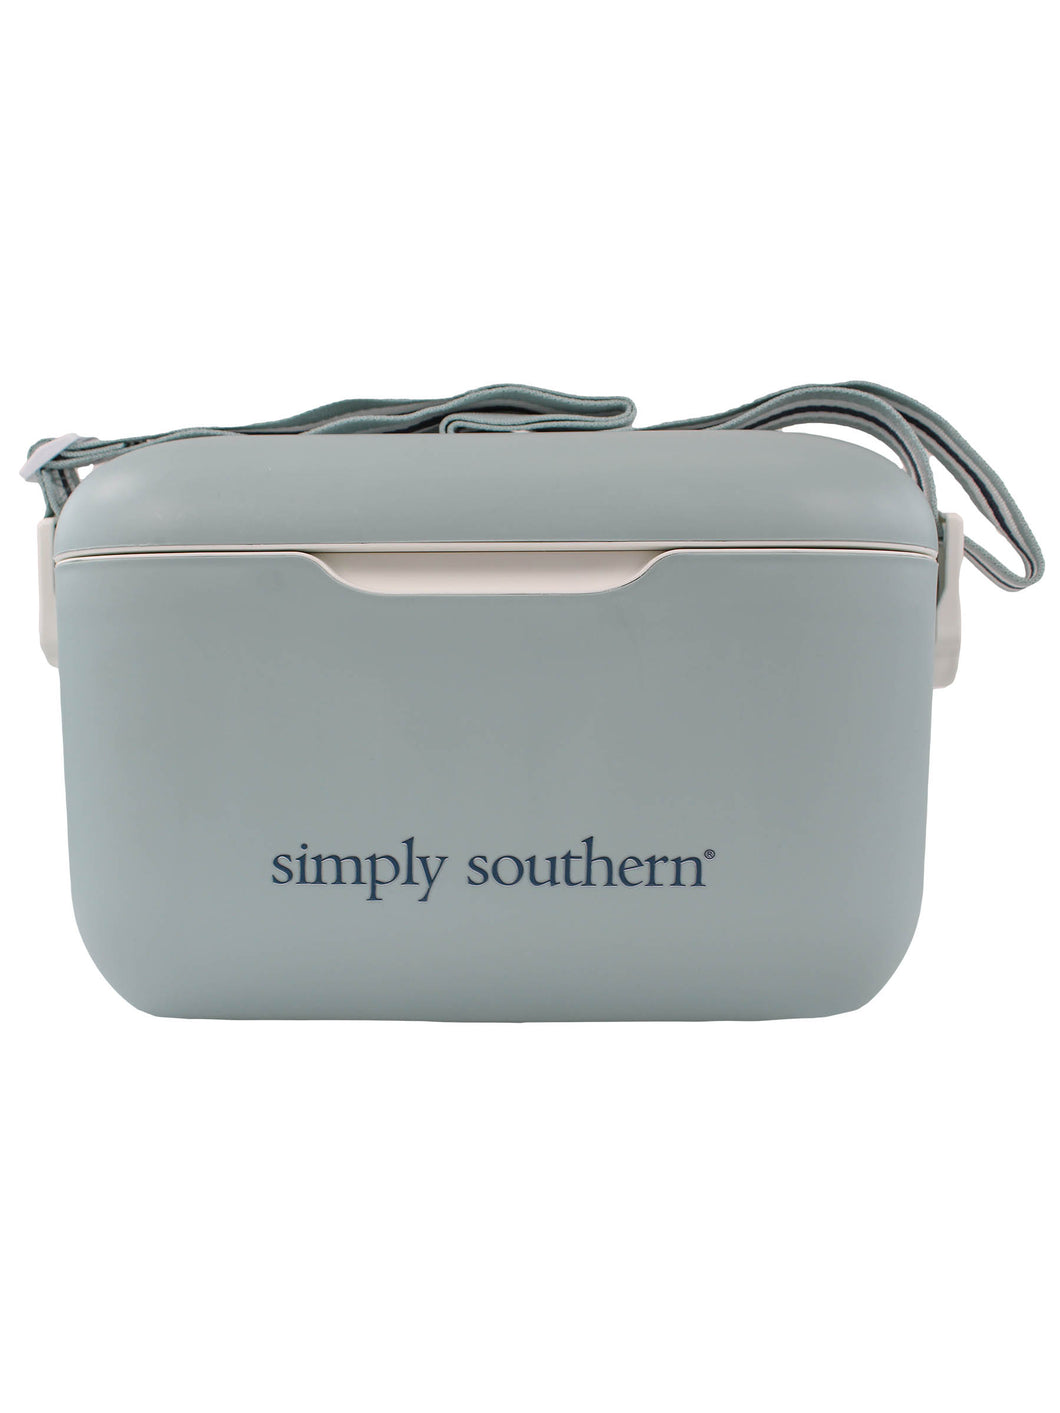 Simply Southern 21 Quart Cooler